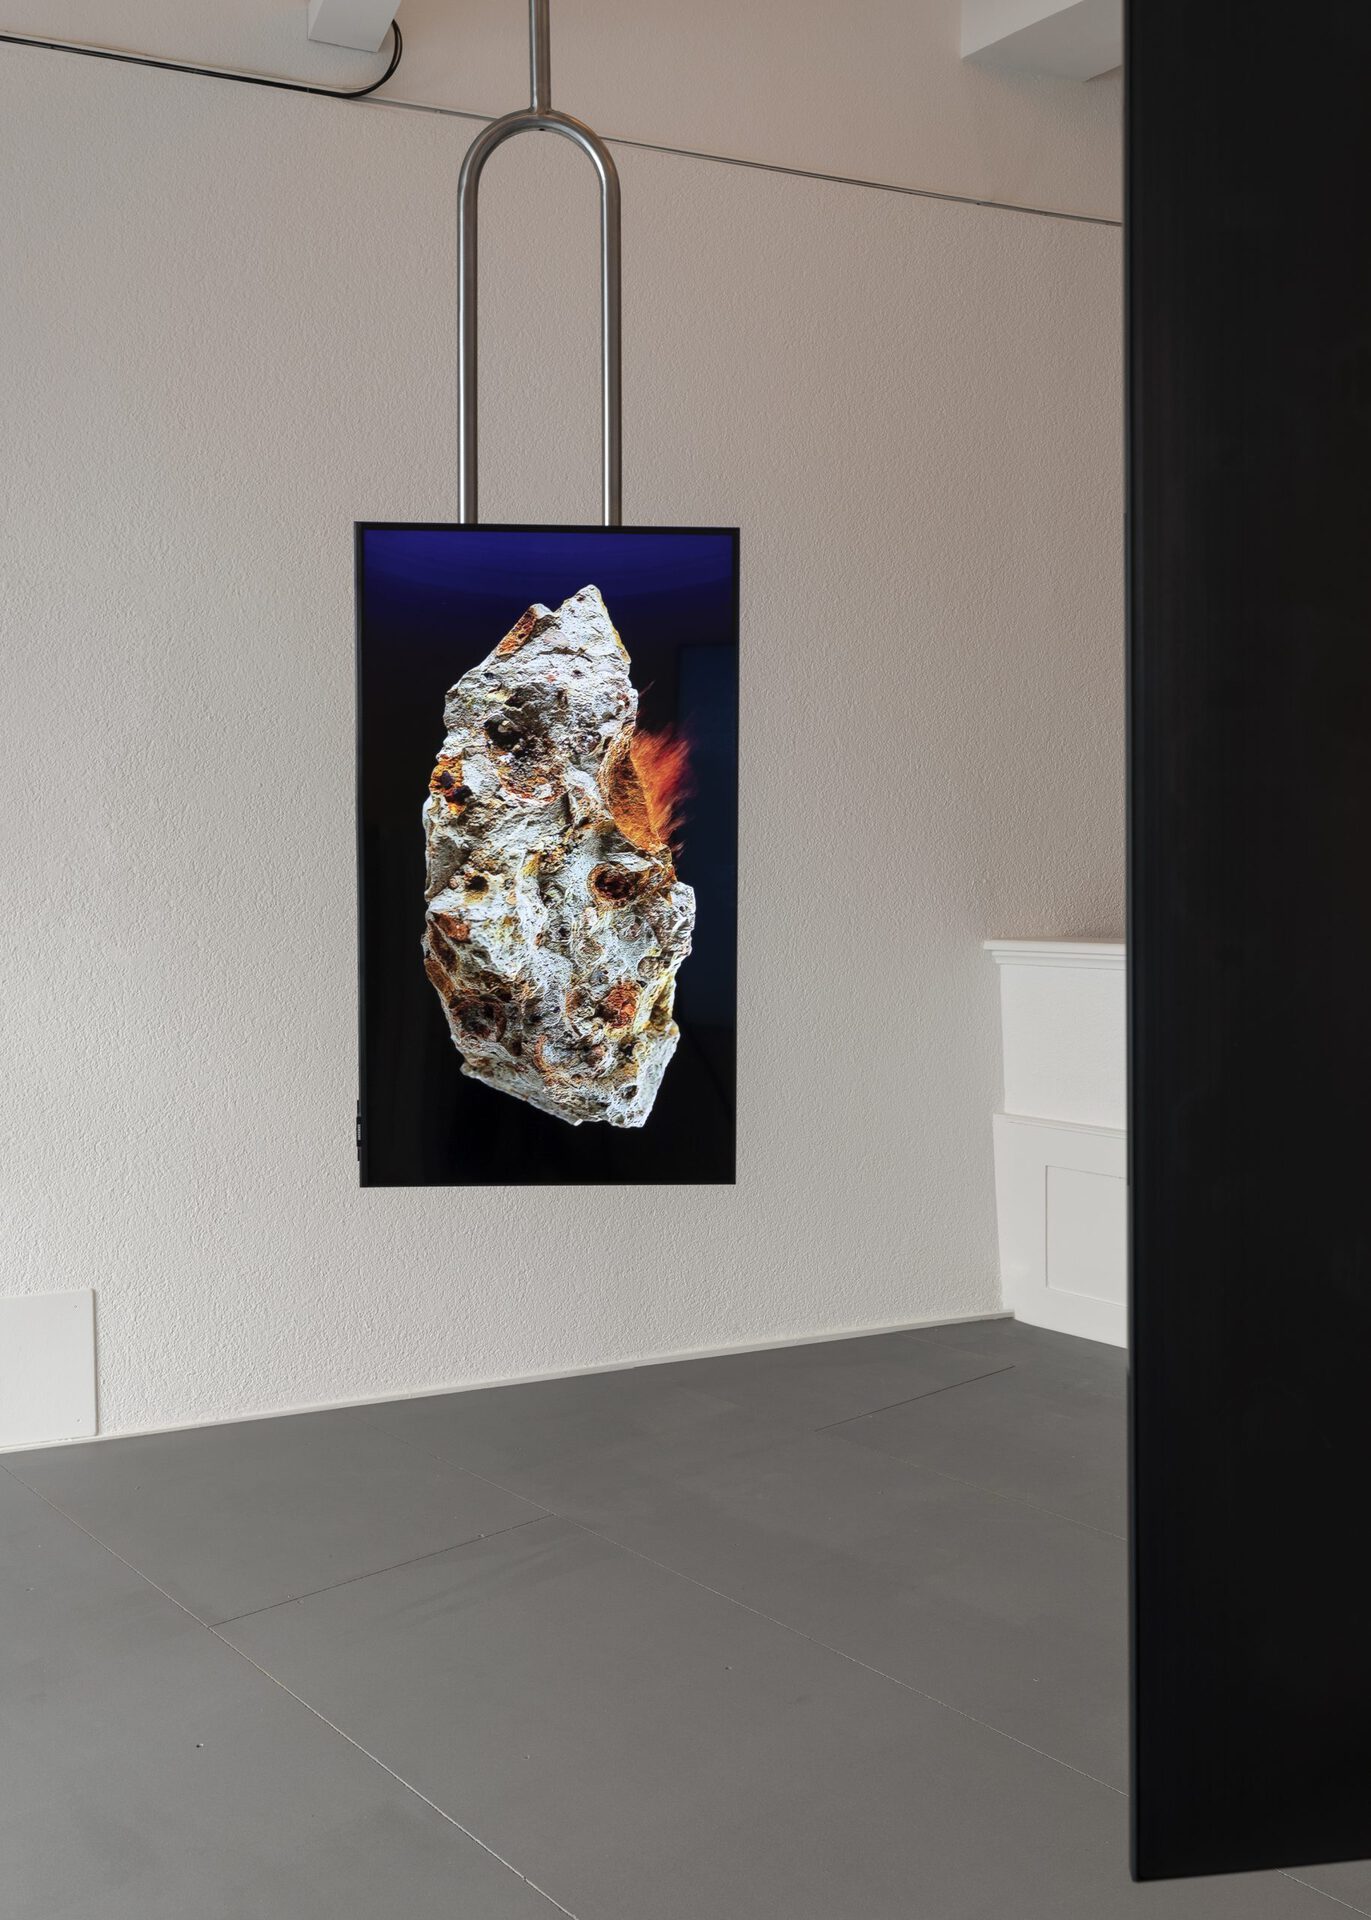 Installation views of the exhibition "Seemingly Incurable Sensation of Temporal Ambiguity" (2021) at the KRONE COURONNE / Lithic Alliance, Notes on Erasure, 2021. Photo: © Michal Florence Schorro.